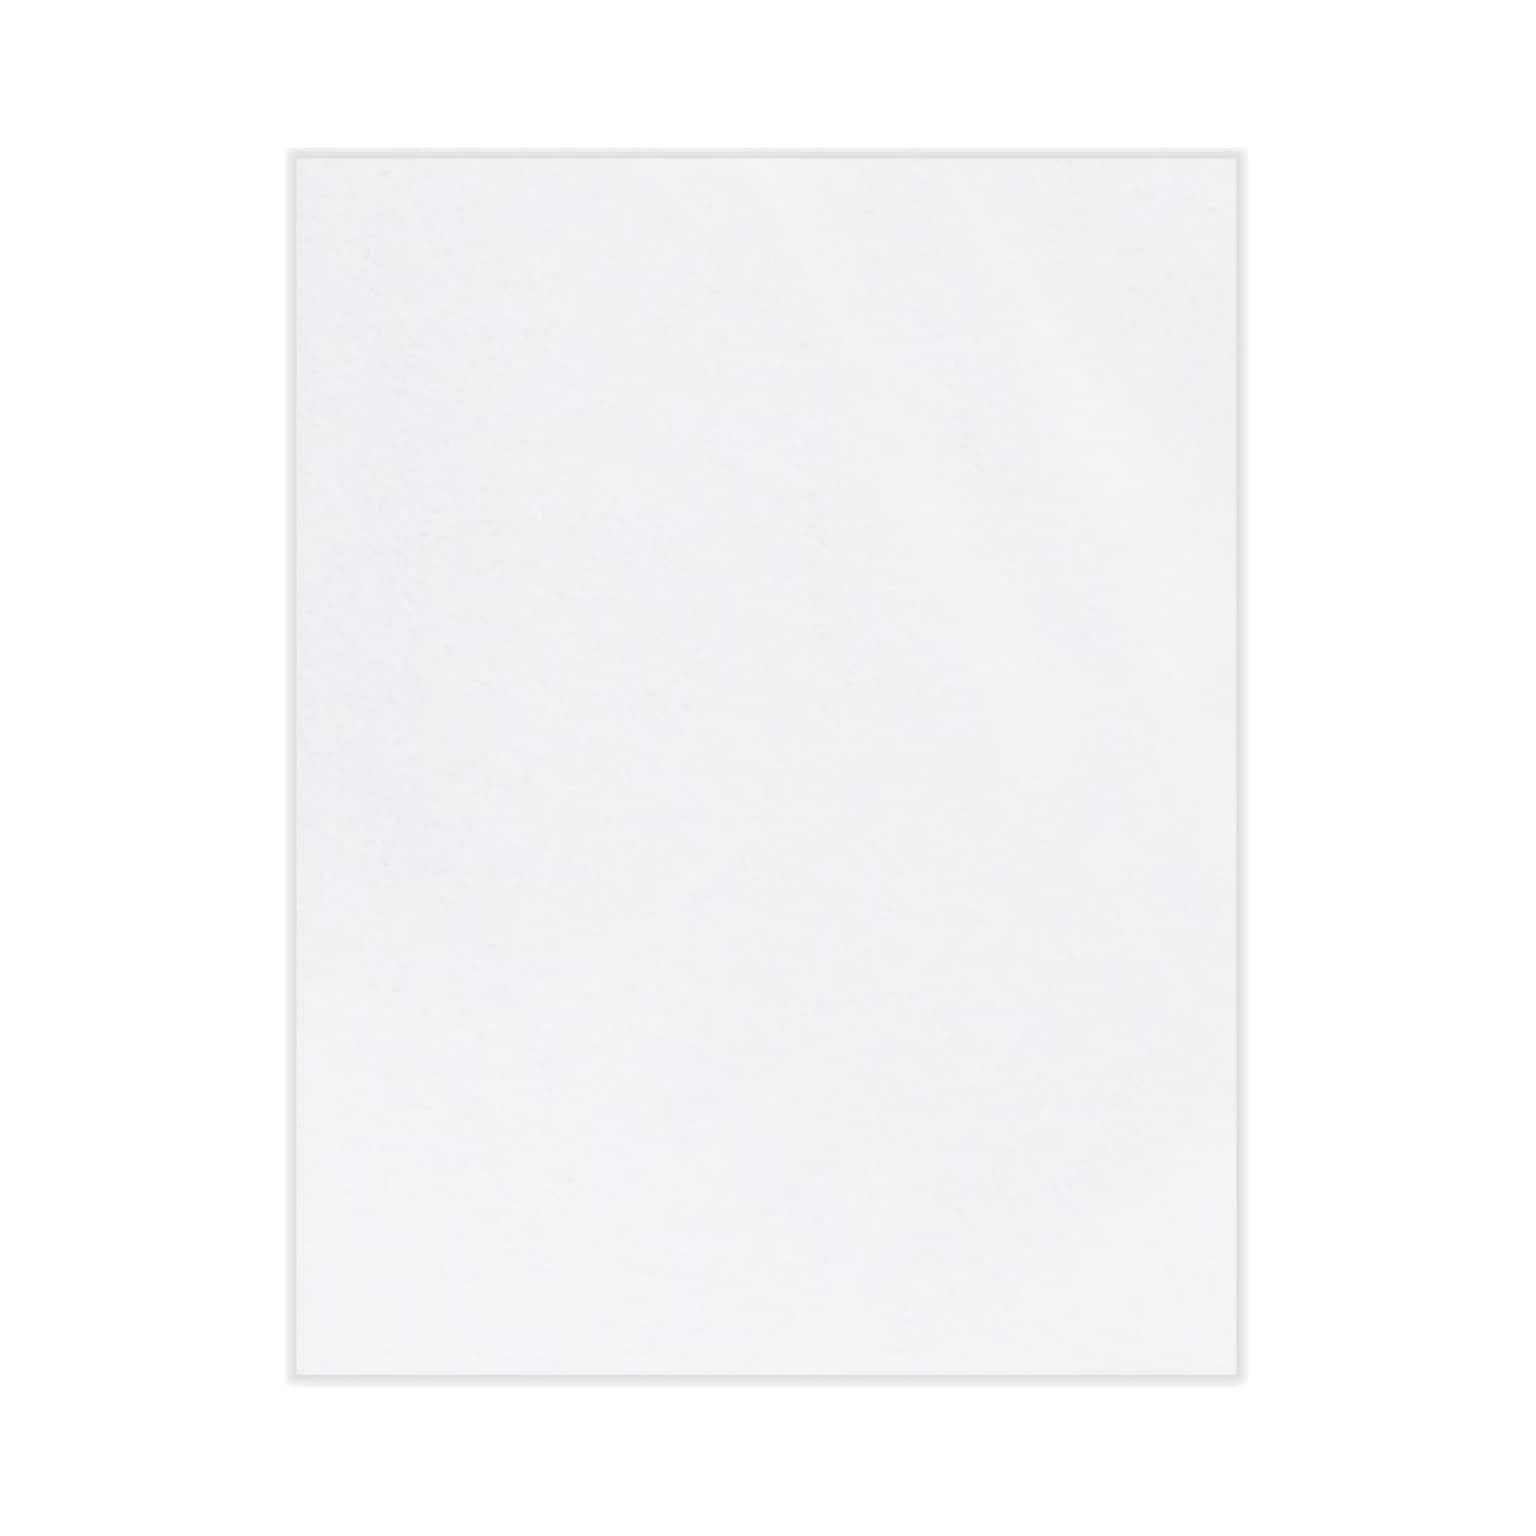 LUX Bright White, 100% Recycled Cardstock, 8 1/2 x 11, Letter, 500 Sheets